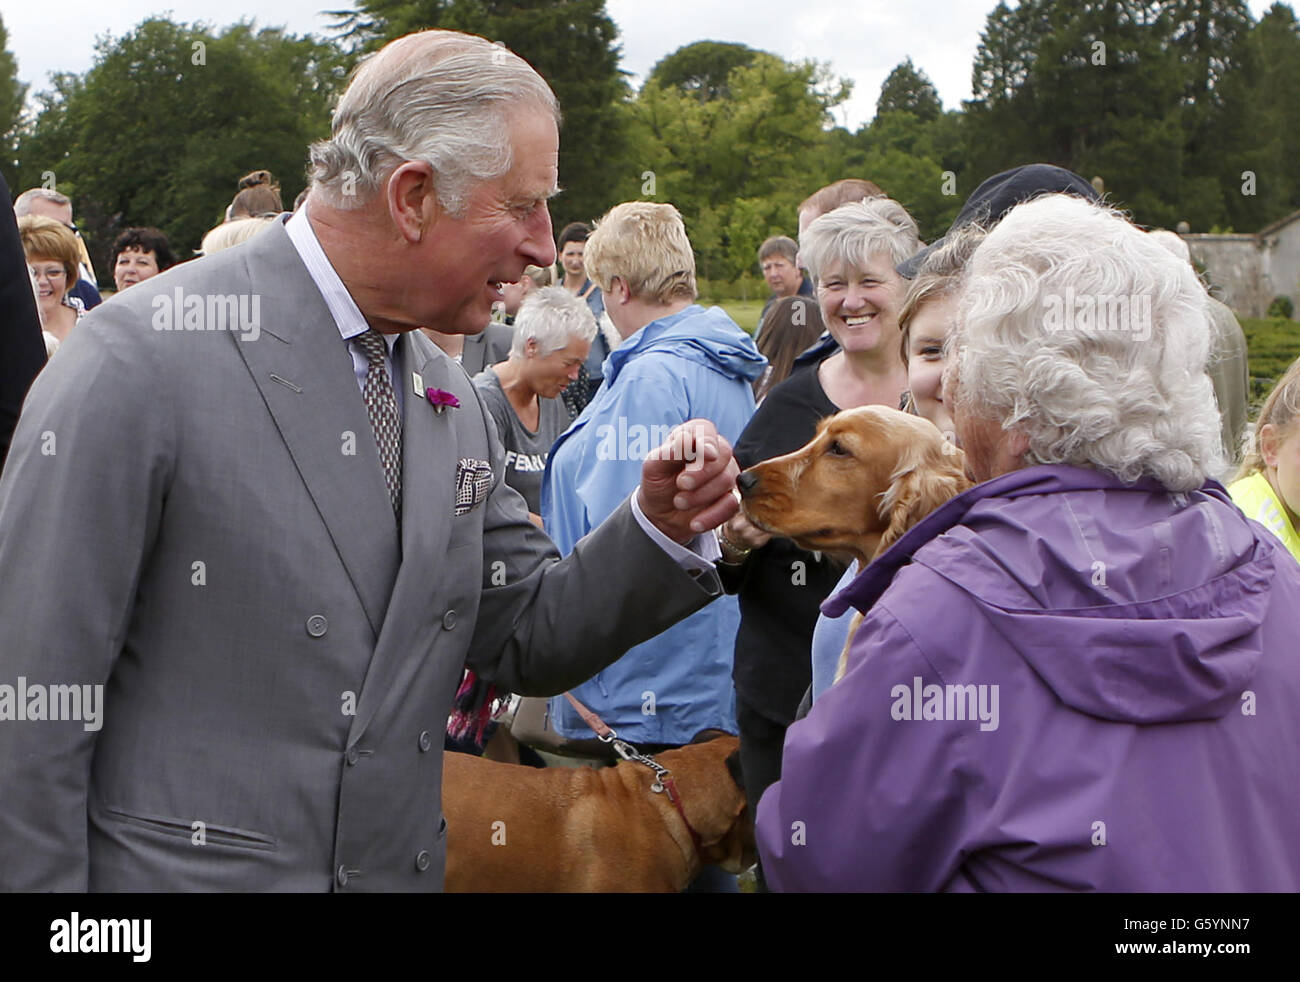 The Prince of Wales, known as the Duke of Rothesay while in Scotland, at the Dumfries House Dog Show in the grounds of Dumfries House, Cumnock, Ayrshire. Stock Photo